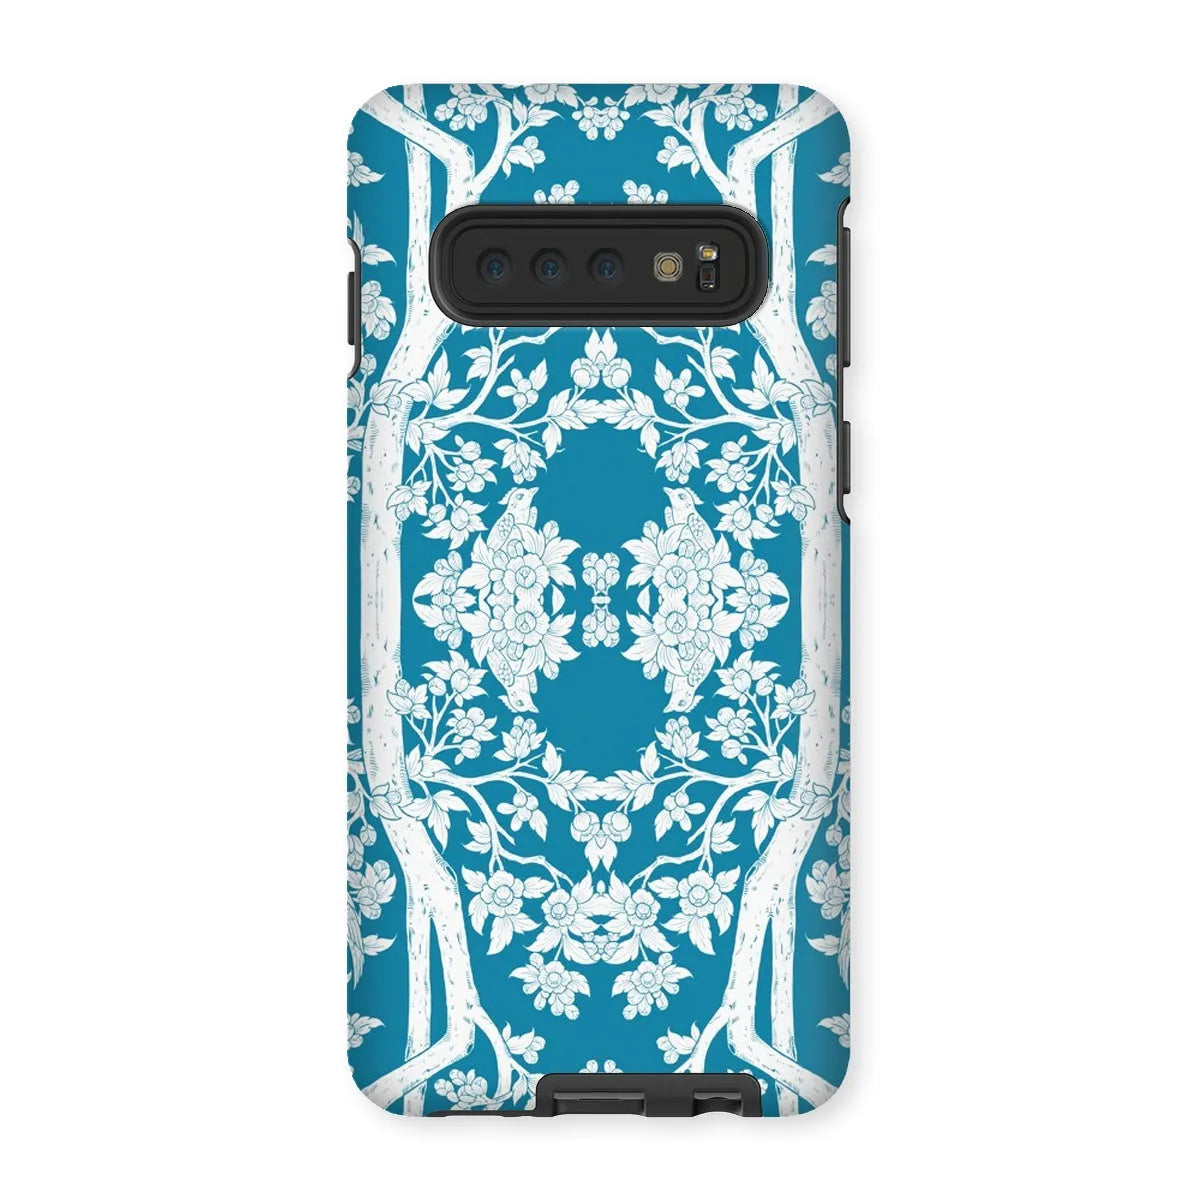 Aviary Blue Aesthetic Pattern Art Phone Case - Samsung Galaxy S10 / Matte - Mobile Phone Cases - Aesthetic Art